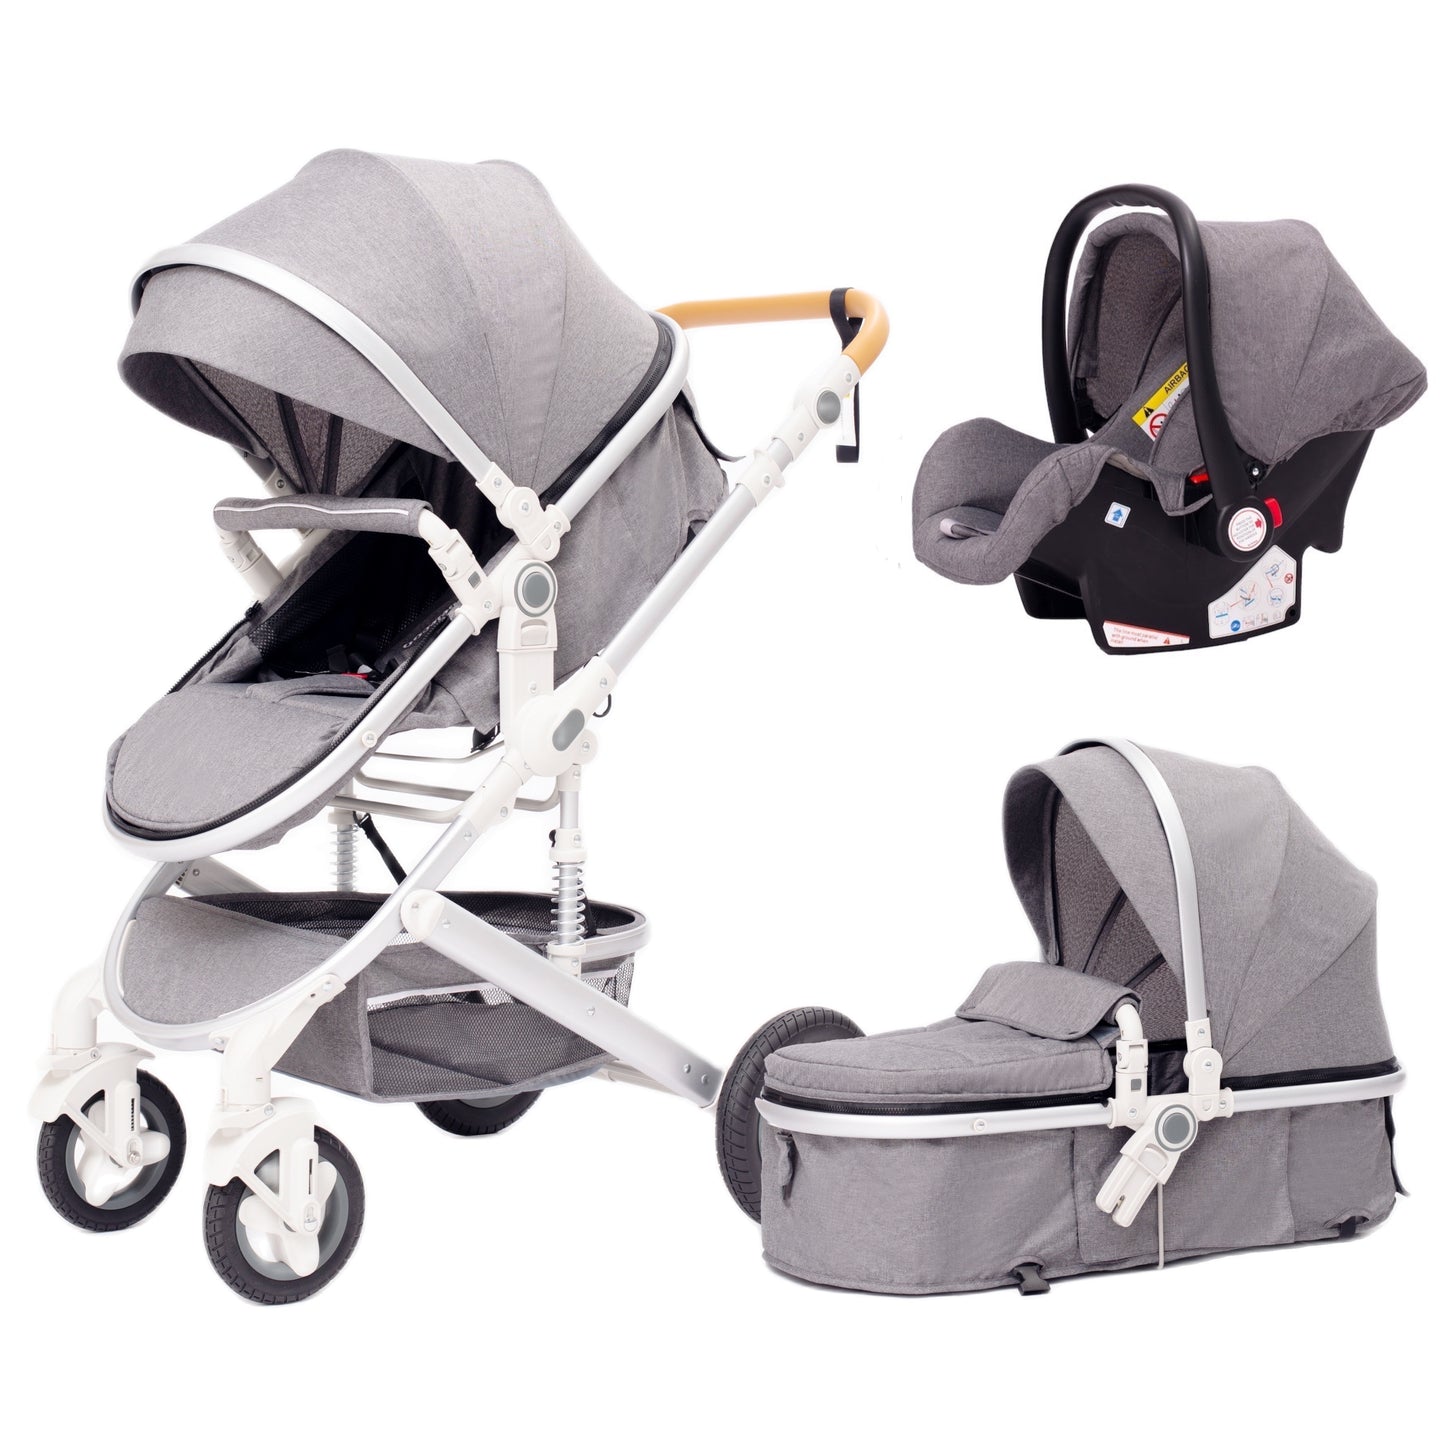 3 in 1 Stroller Baby Stroller  Multifunctional High Landscape Portable Aluminum Frame CPC Safety Baby Carriage   Free Shipping